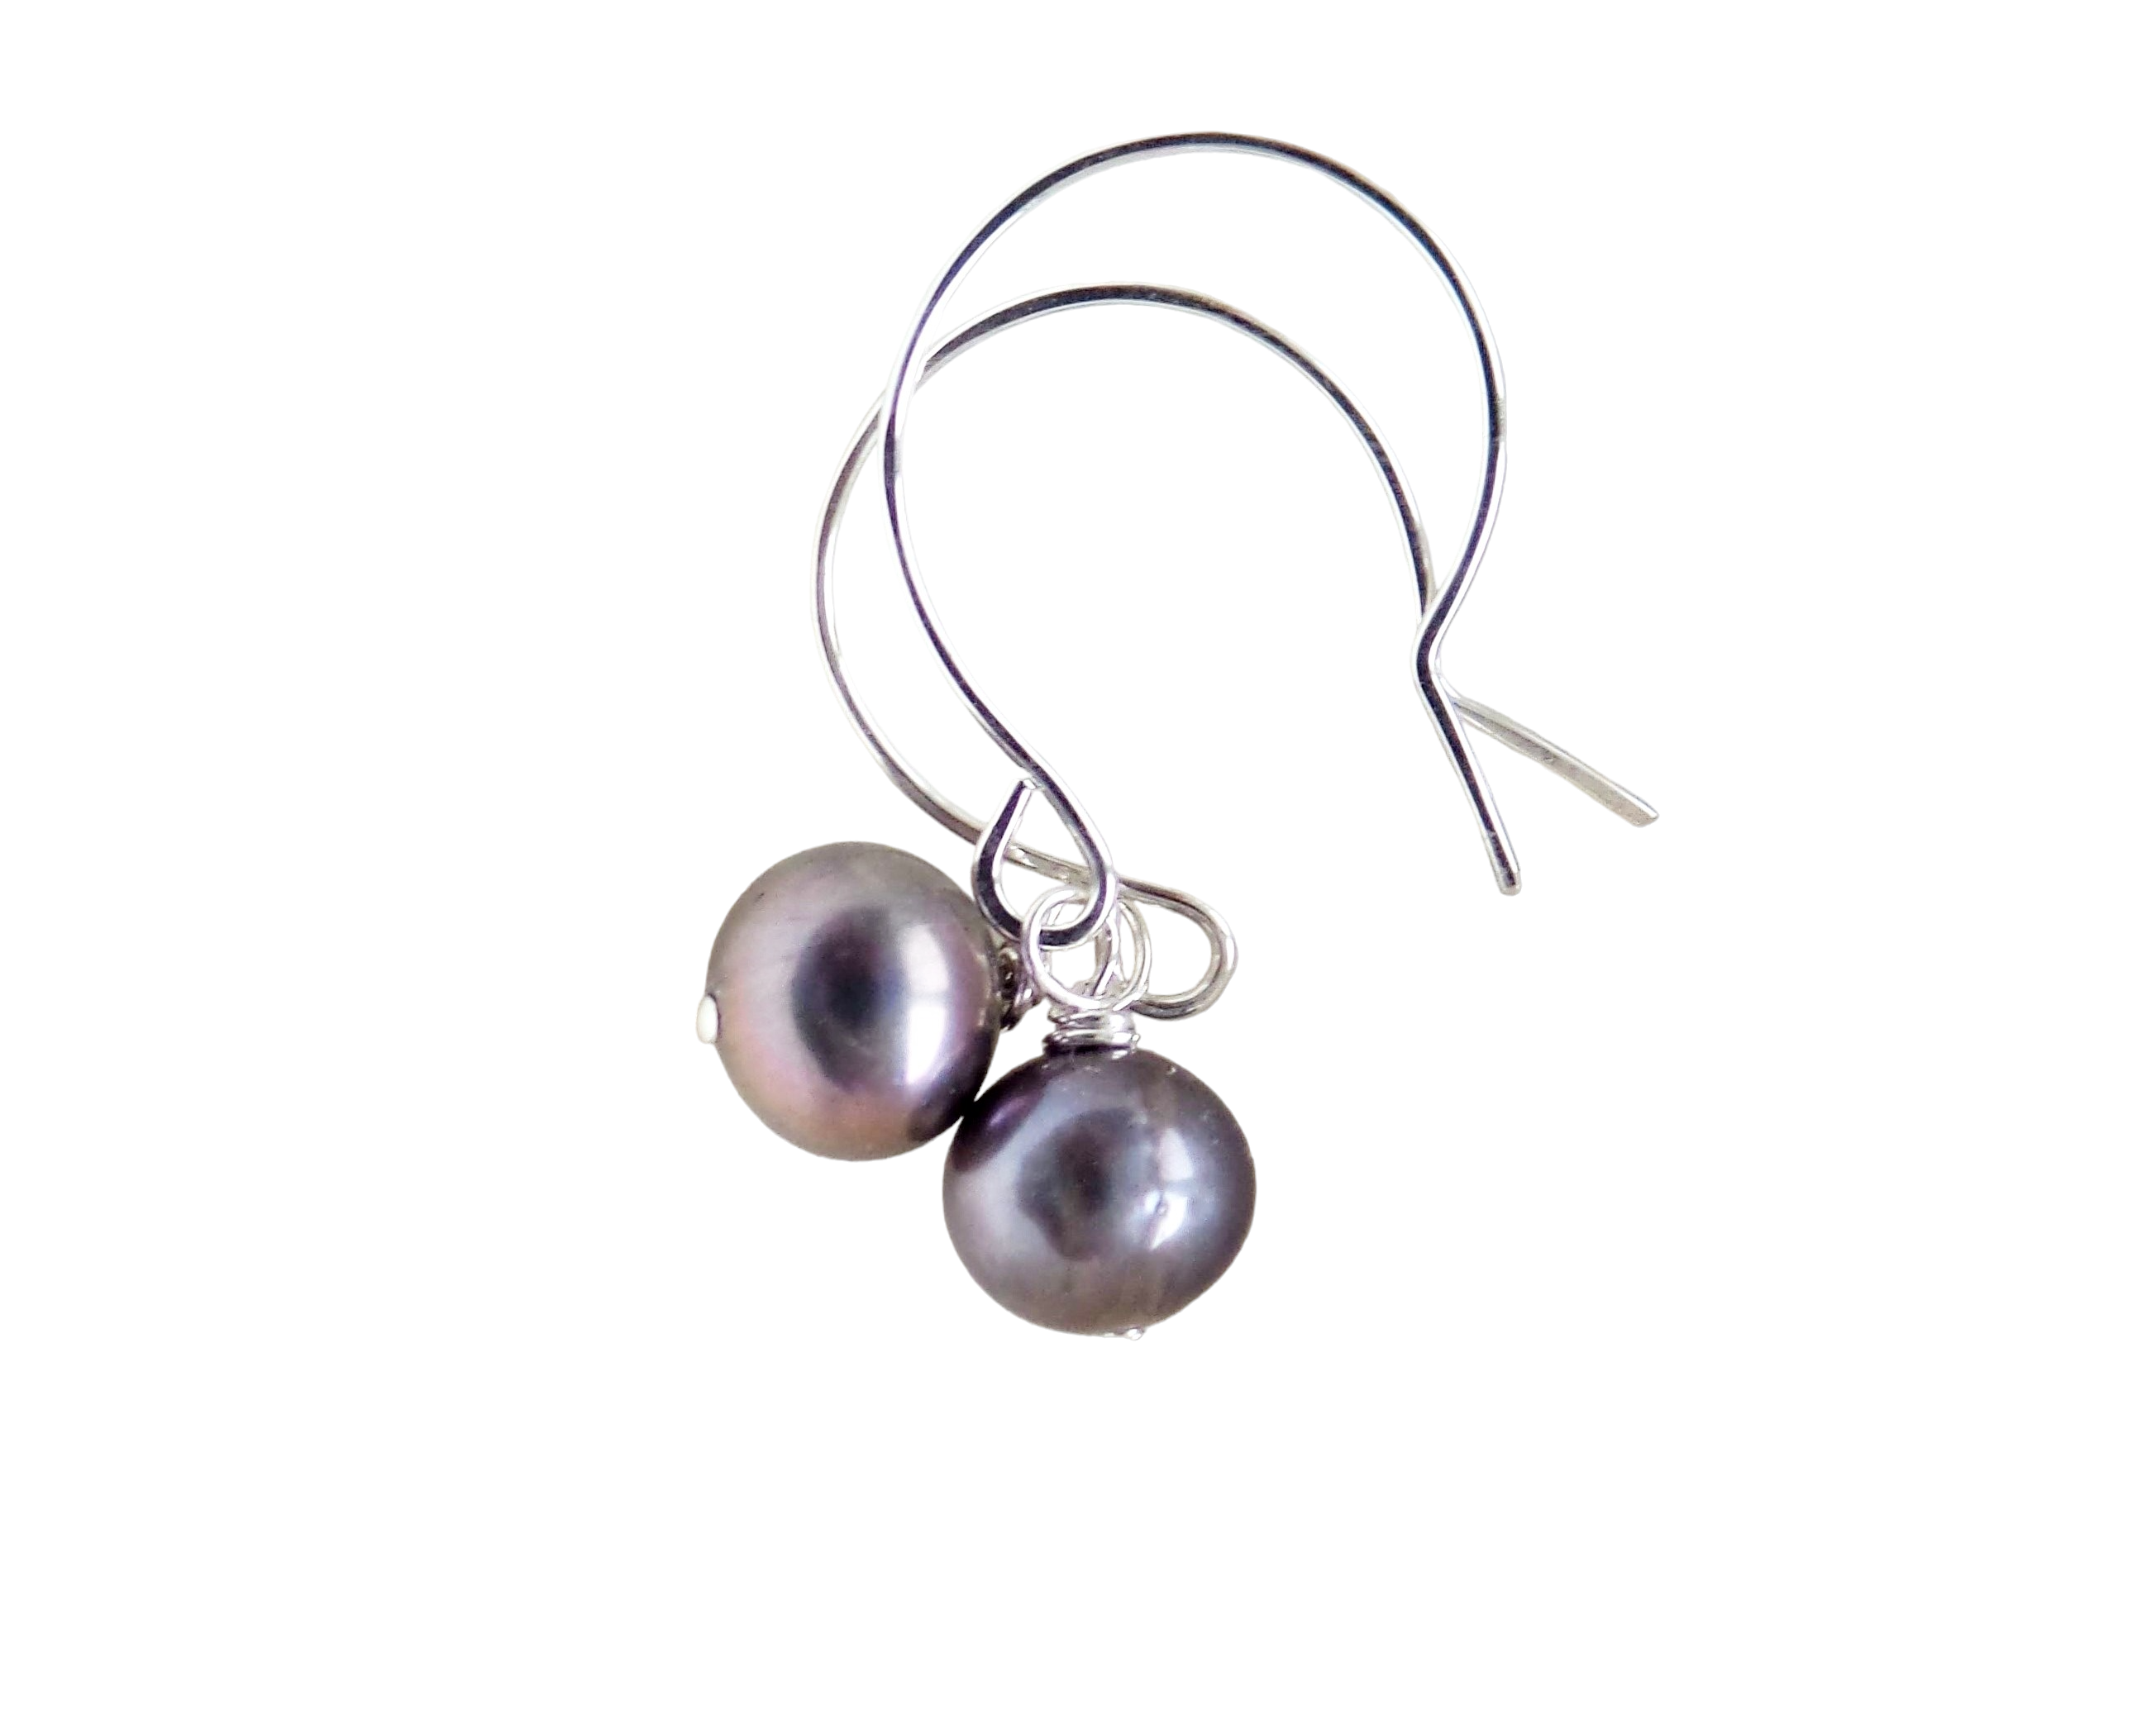 Pin by Tiina Mittler on Gimme Gimme | Pearl earrings, Black pearl earrings, Pearl  earrings dangle